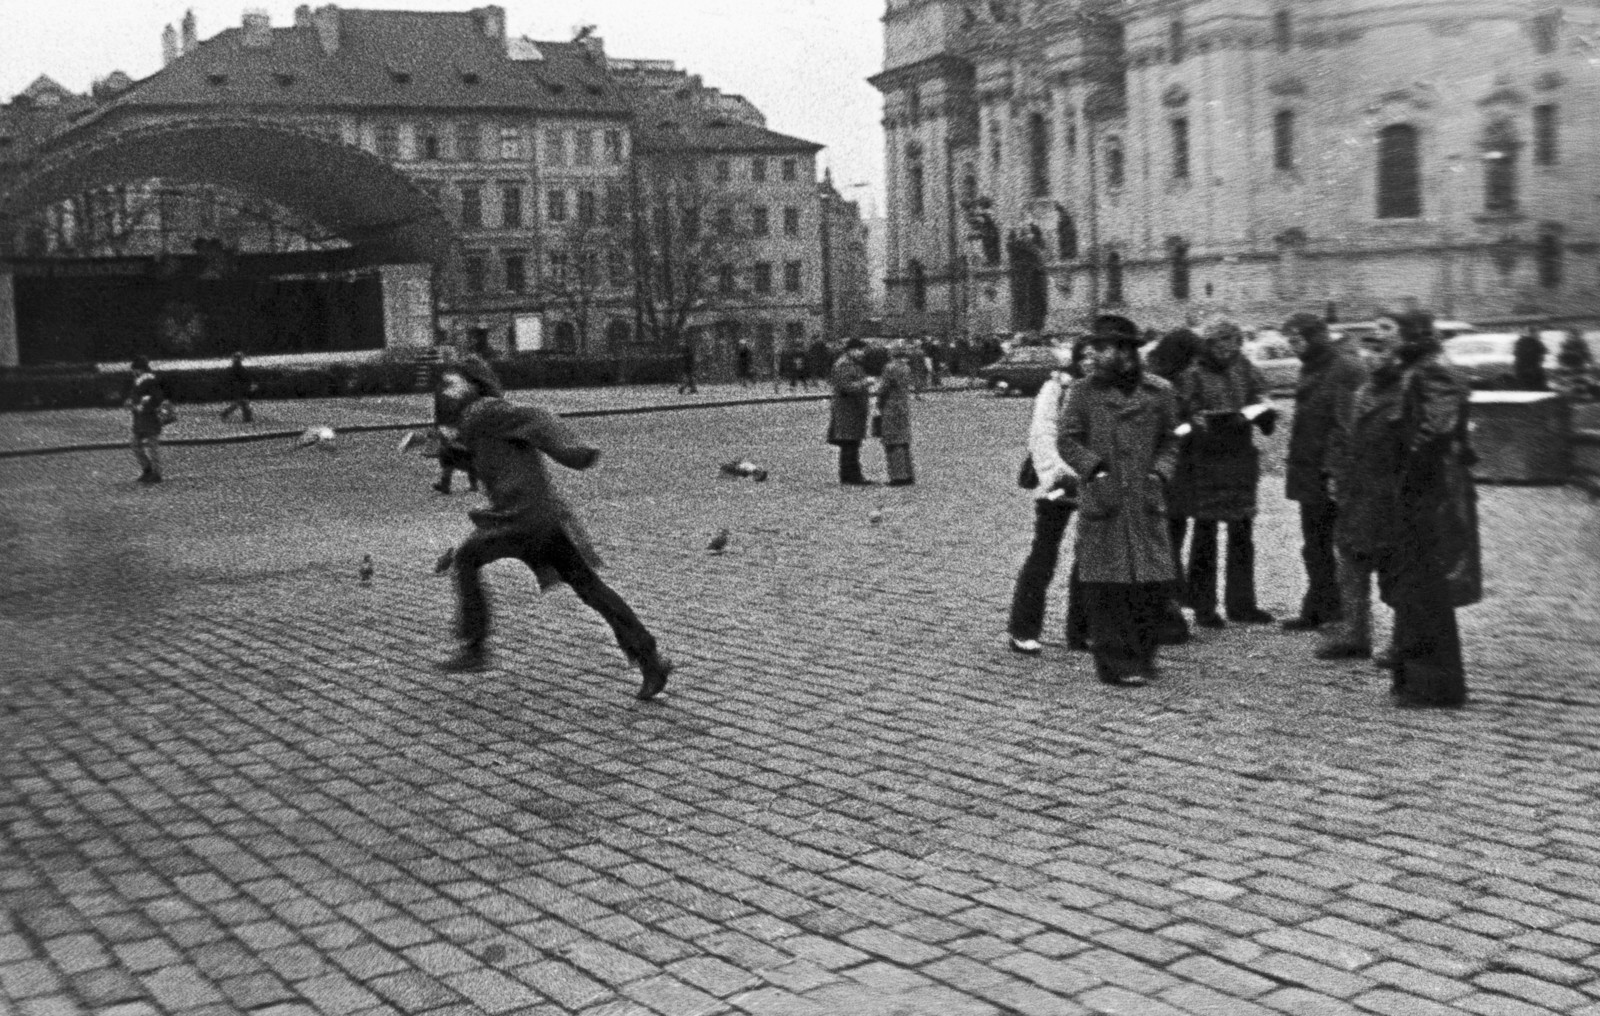 Jiř&iacute; Kovanda January 23rd, 1978, Prague I had a date with several of my friends...we were standing in the square talking&hellip; suddenly, I started to run&hellip; I was running over the square and got lost in one of the streets&hellip; b/w photograph Credits: gb agency, Paris and Krobath, Wien/Berlin